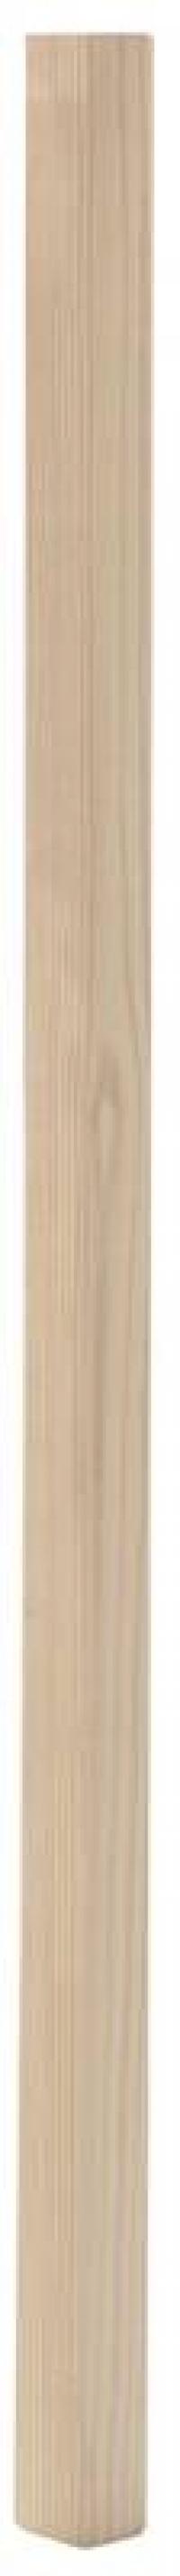 2X2-48" #1 P/T BALUSTER